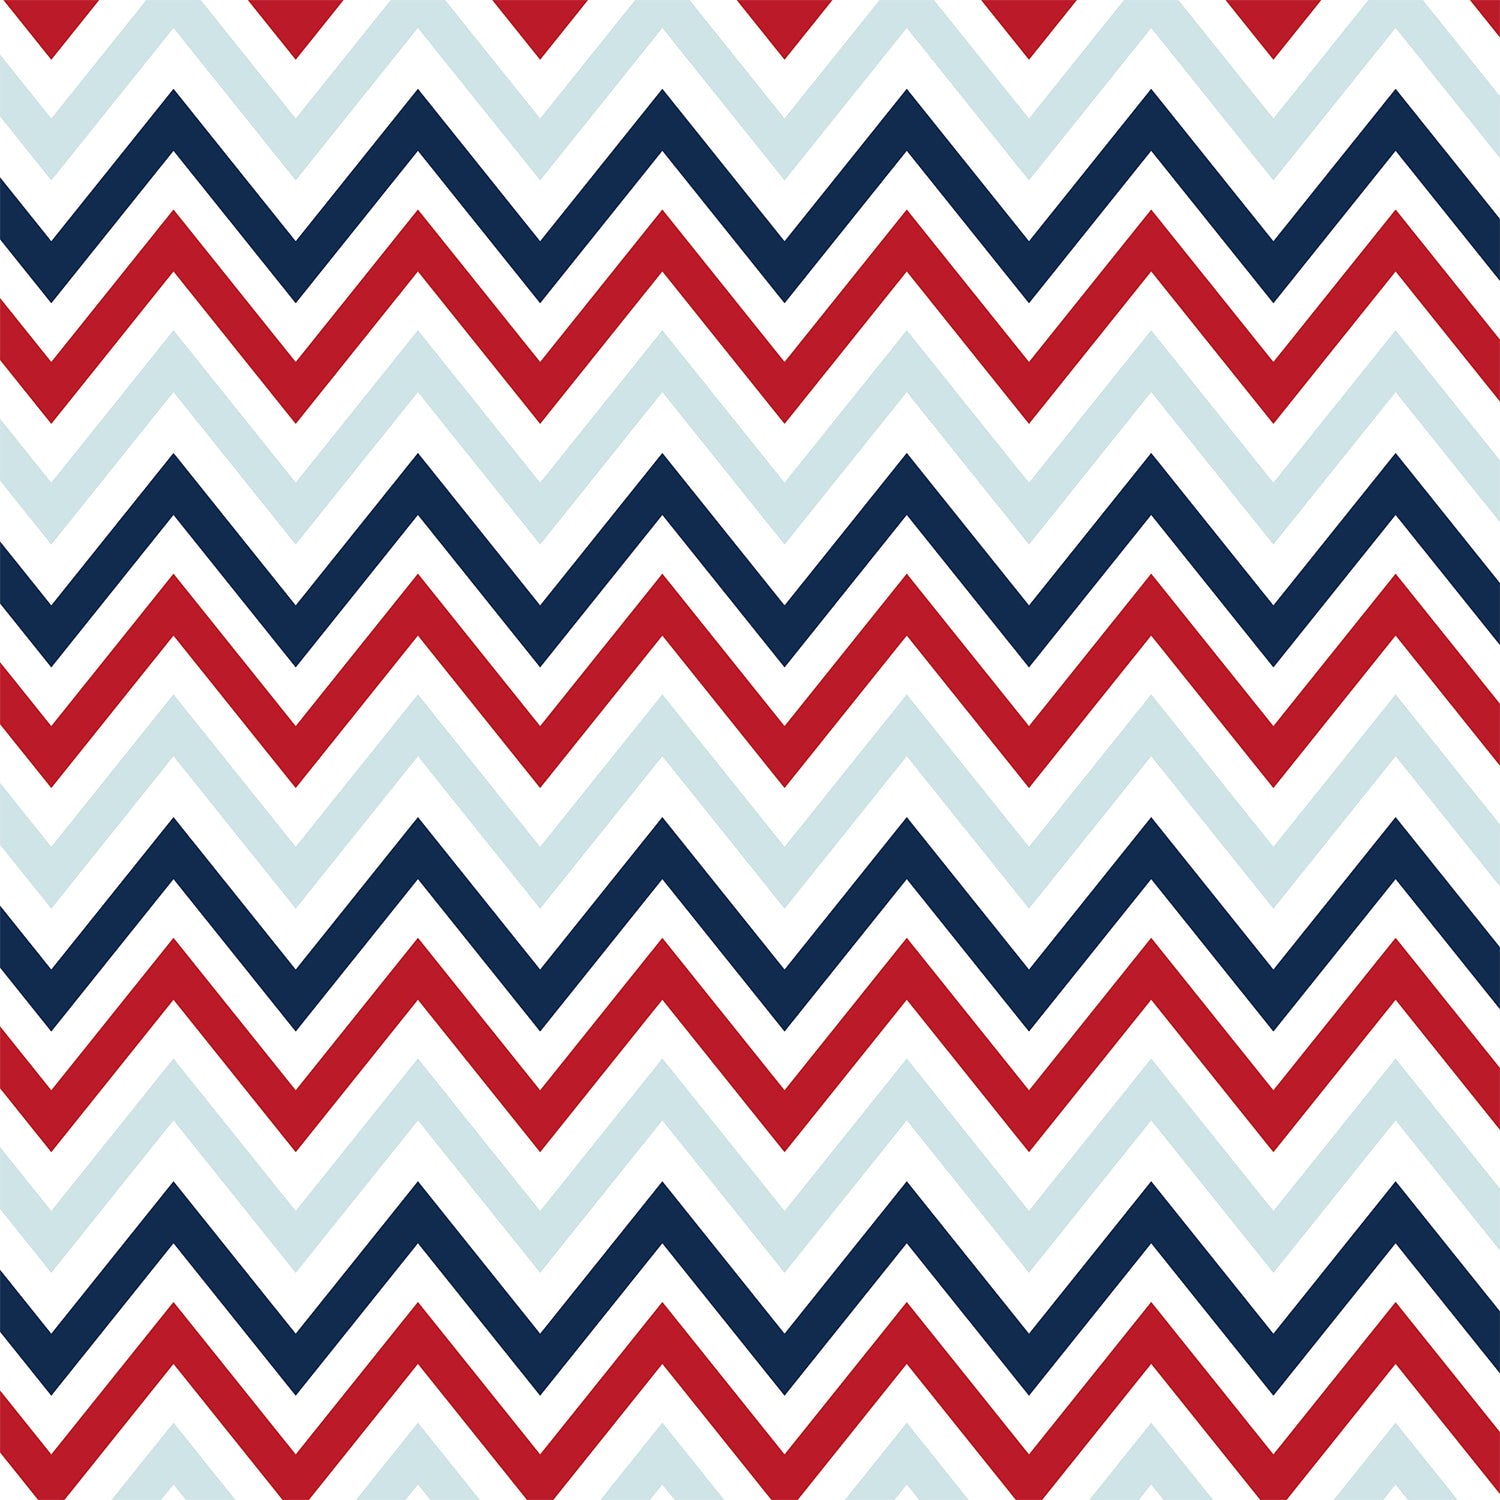 Navy Waves Flat Wrapping Paper Sheet Wholesale Wraphaholic